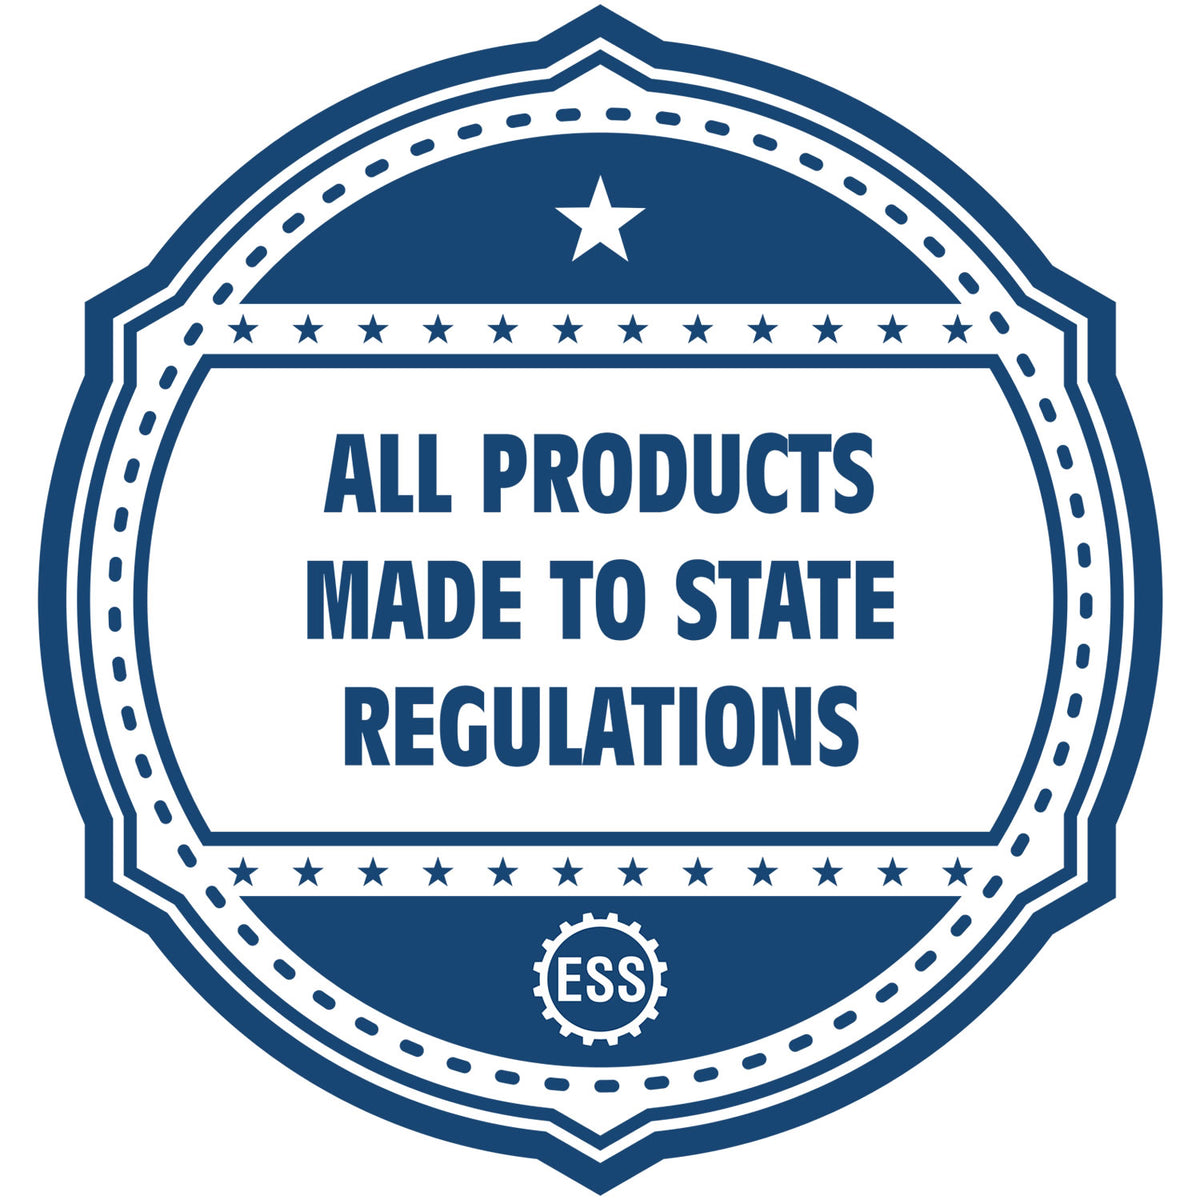 An icon or badge element for the PSI Arkansas Notary Stamp showing that this product is made in compliance with state regulations.